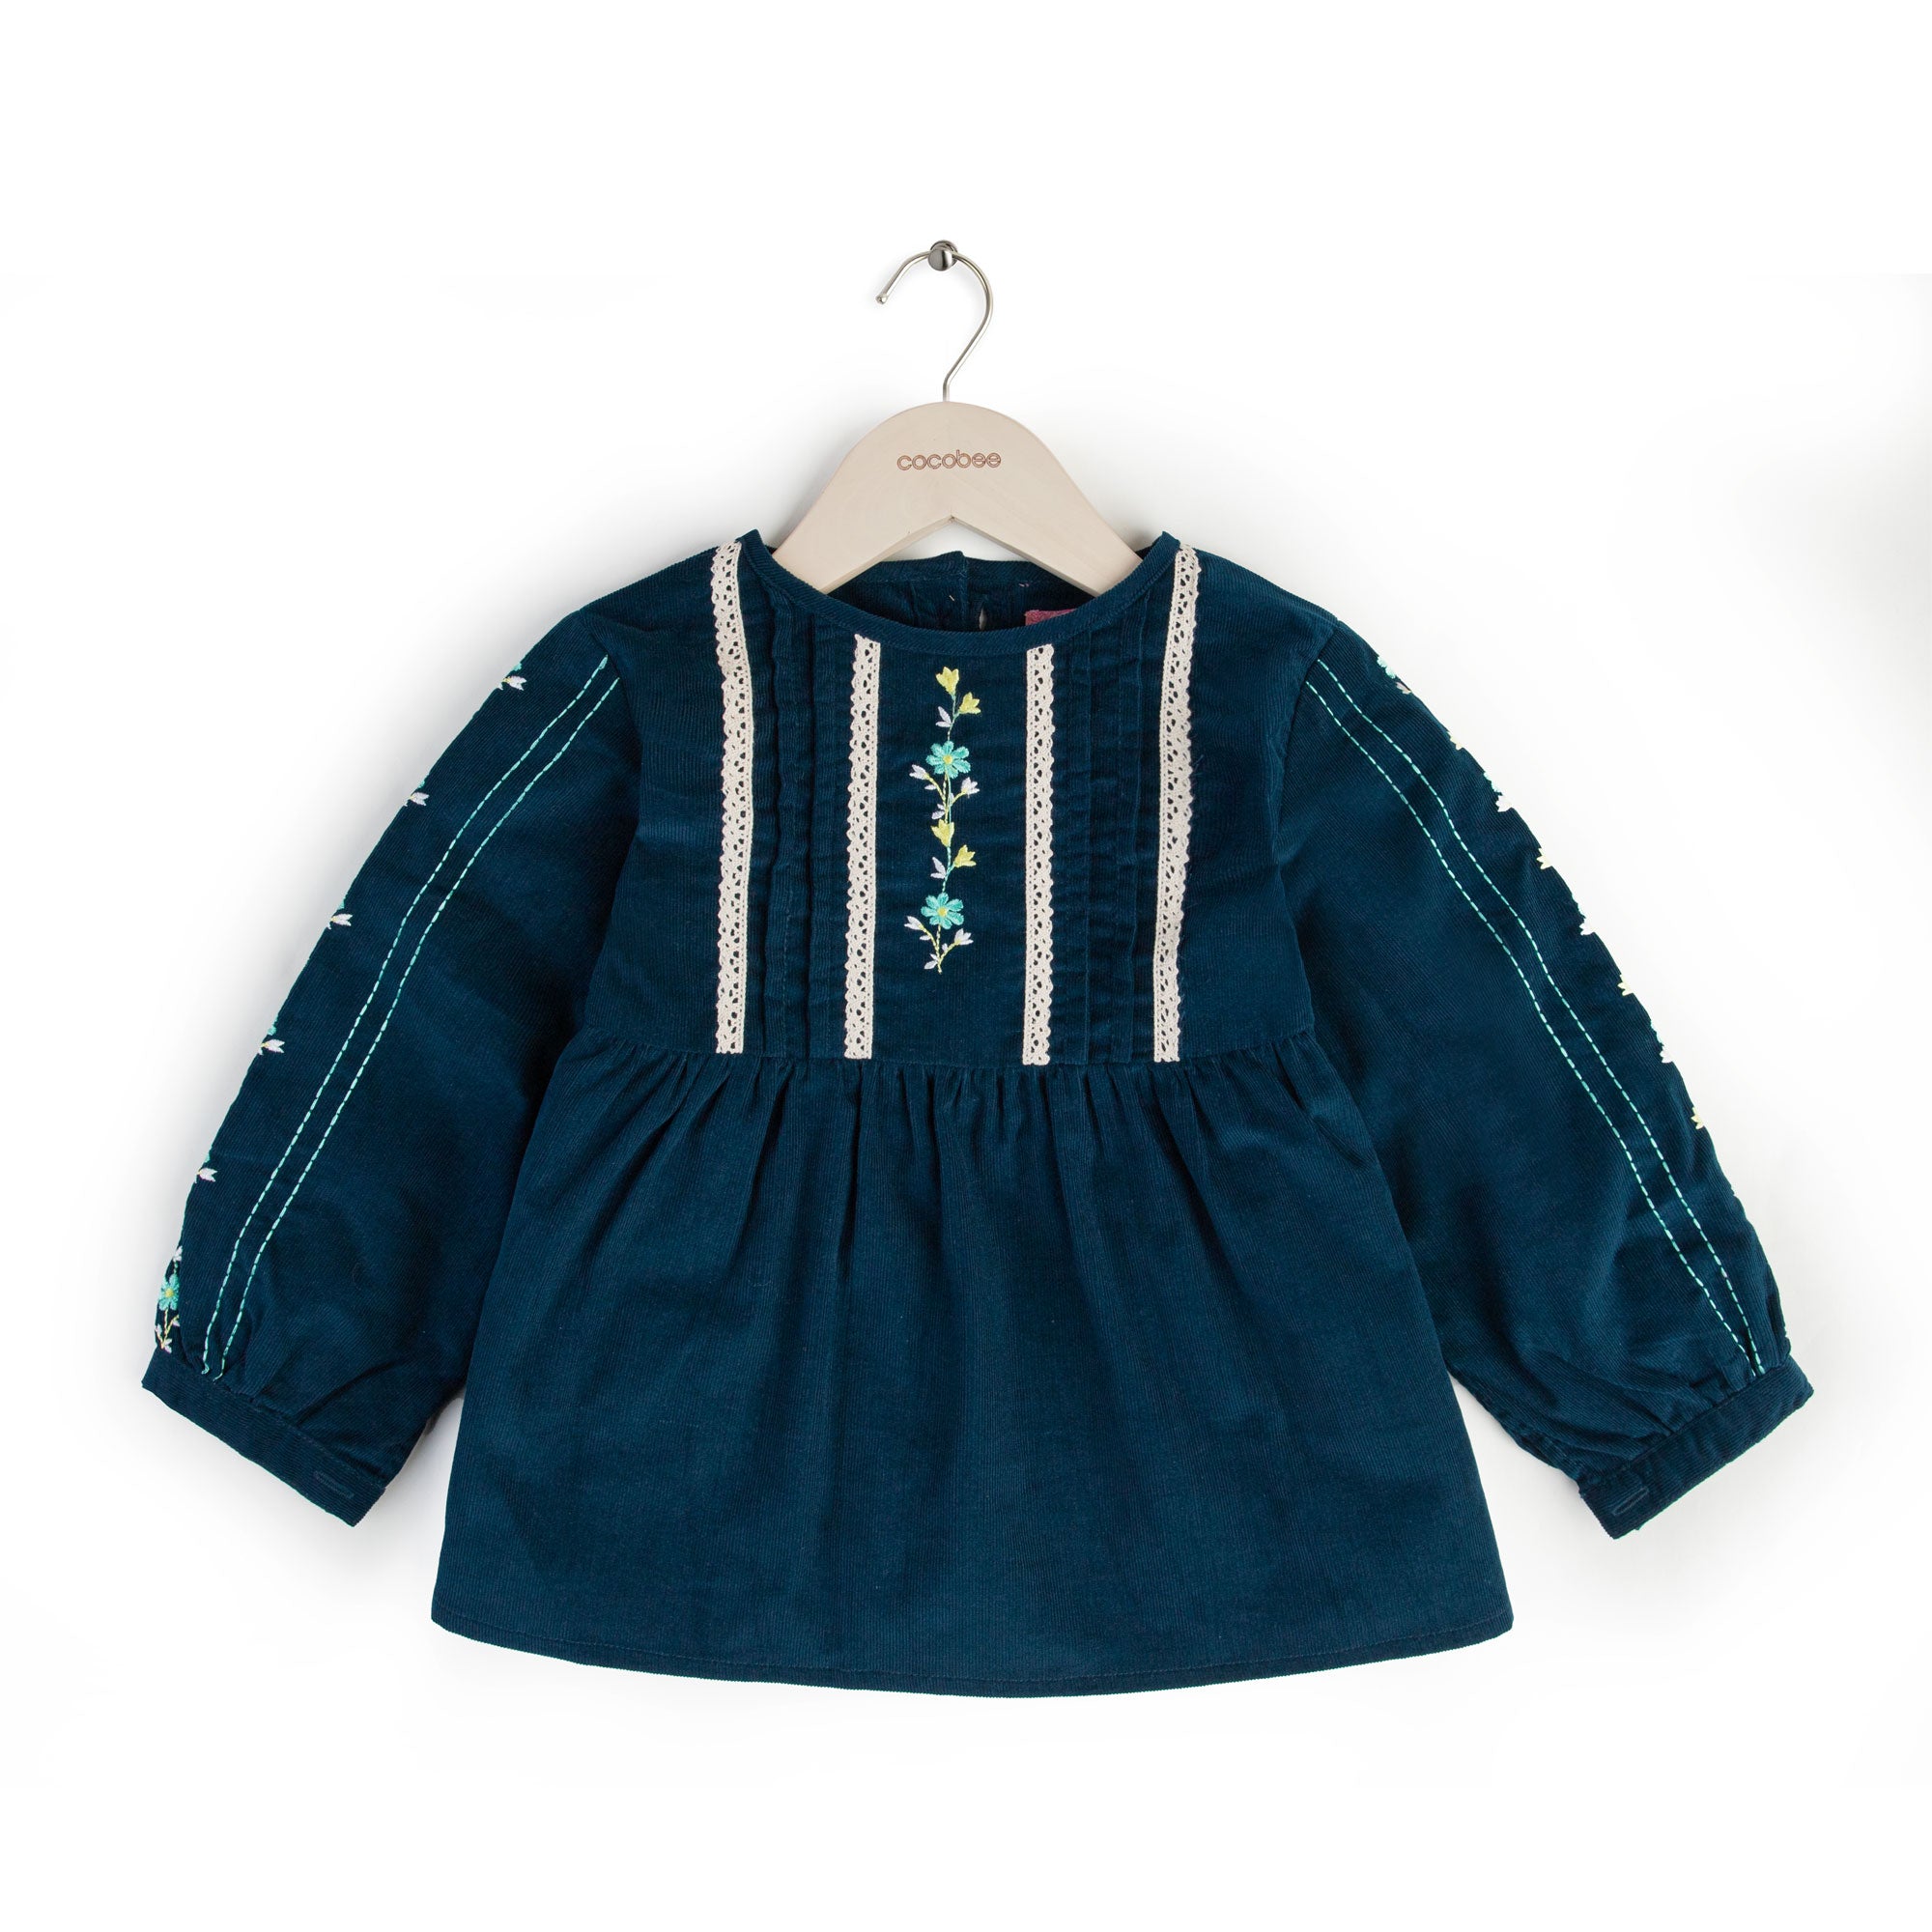 Snazzy Blue Embroidered top